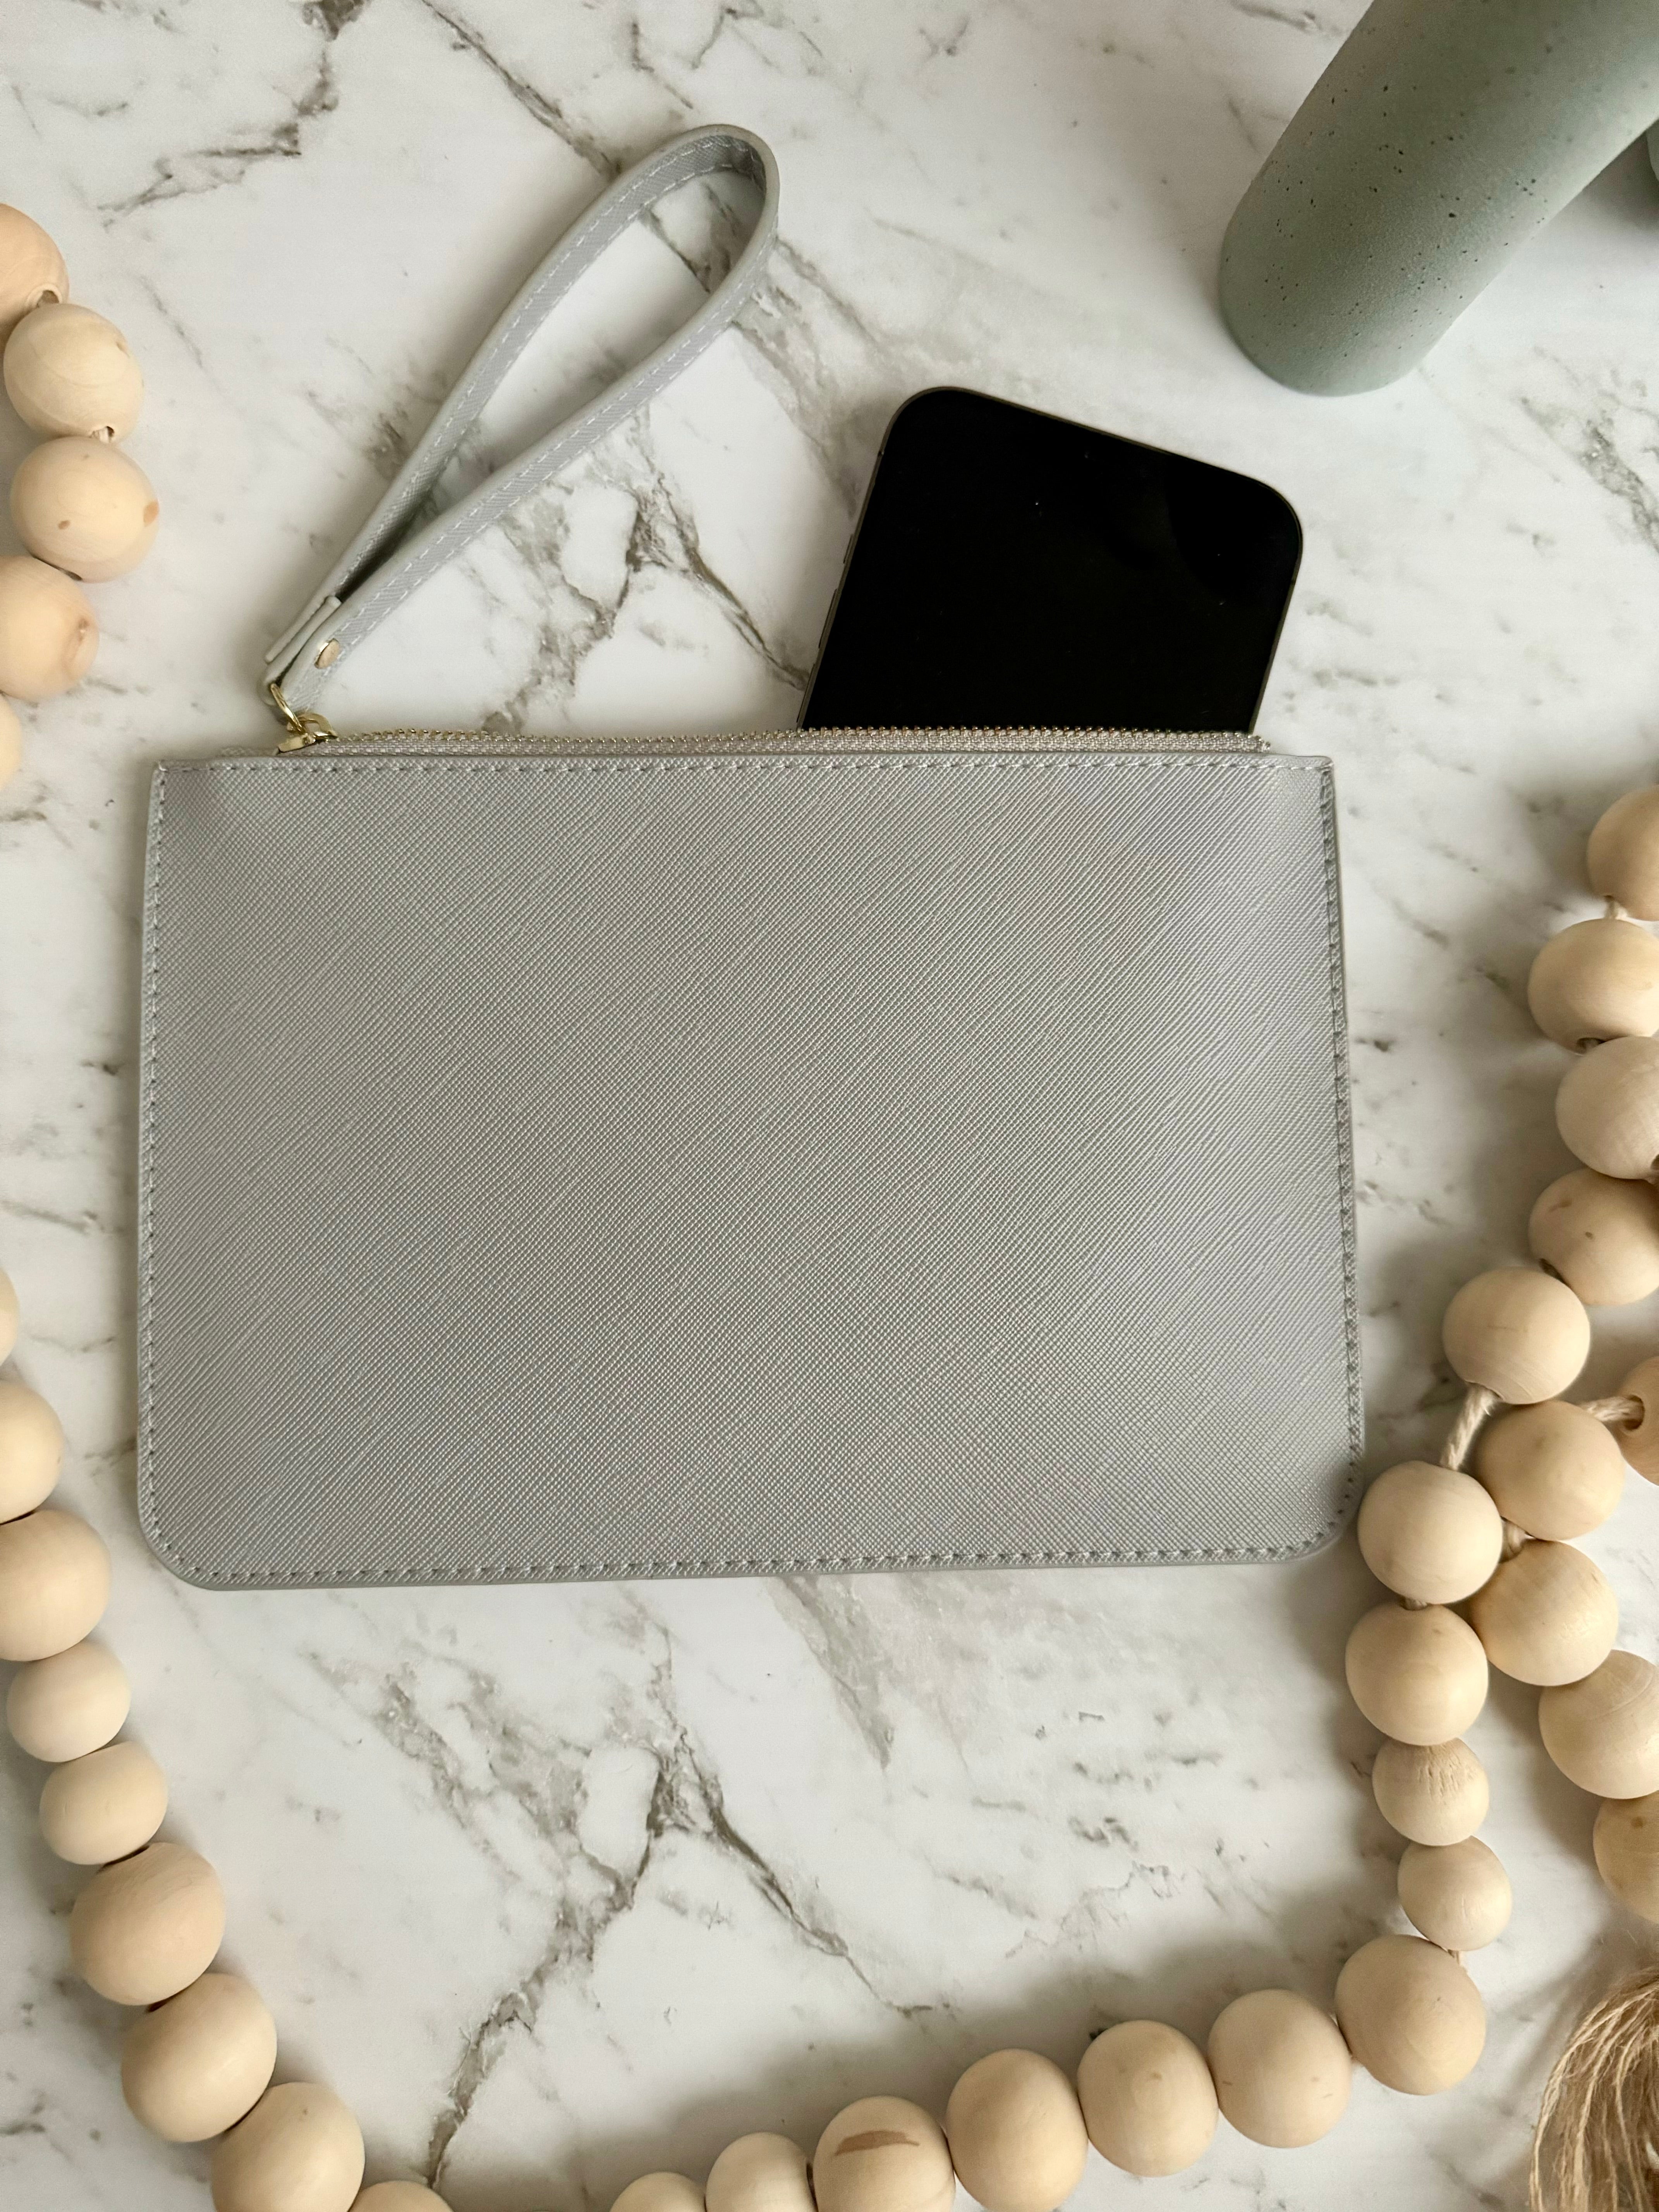 Leatherette Blank Clutch with Wristlet - Only The Sweet Stuff